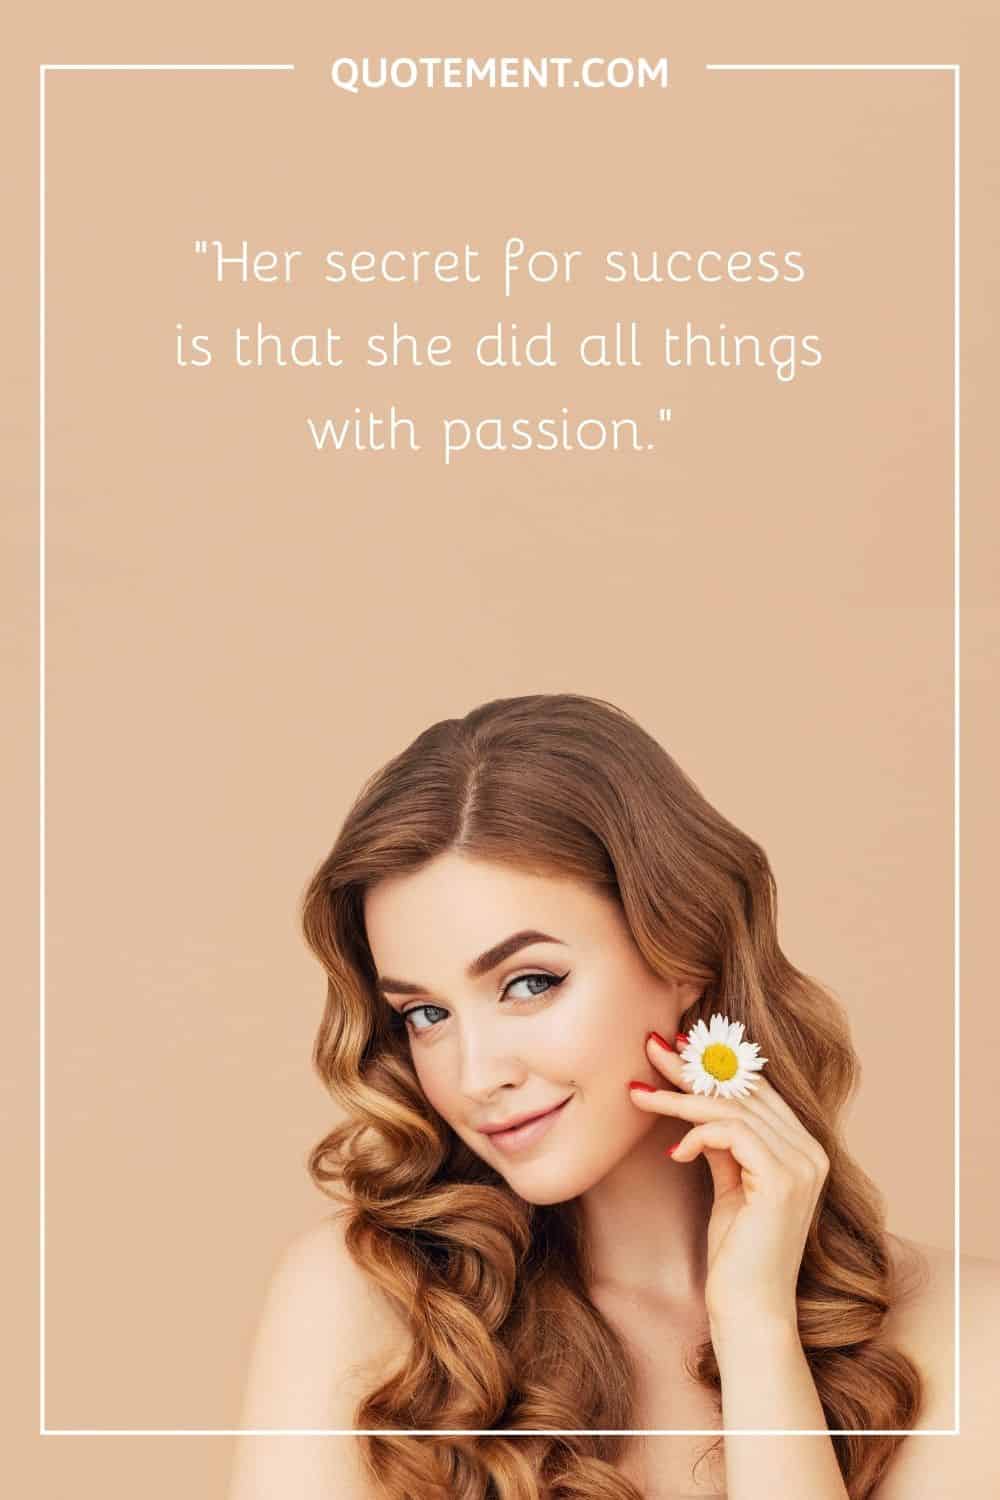 Her secret for success is that she did all things with passion.